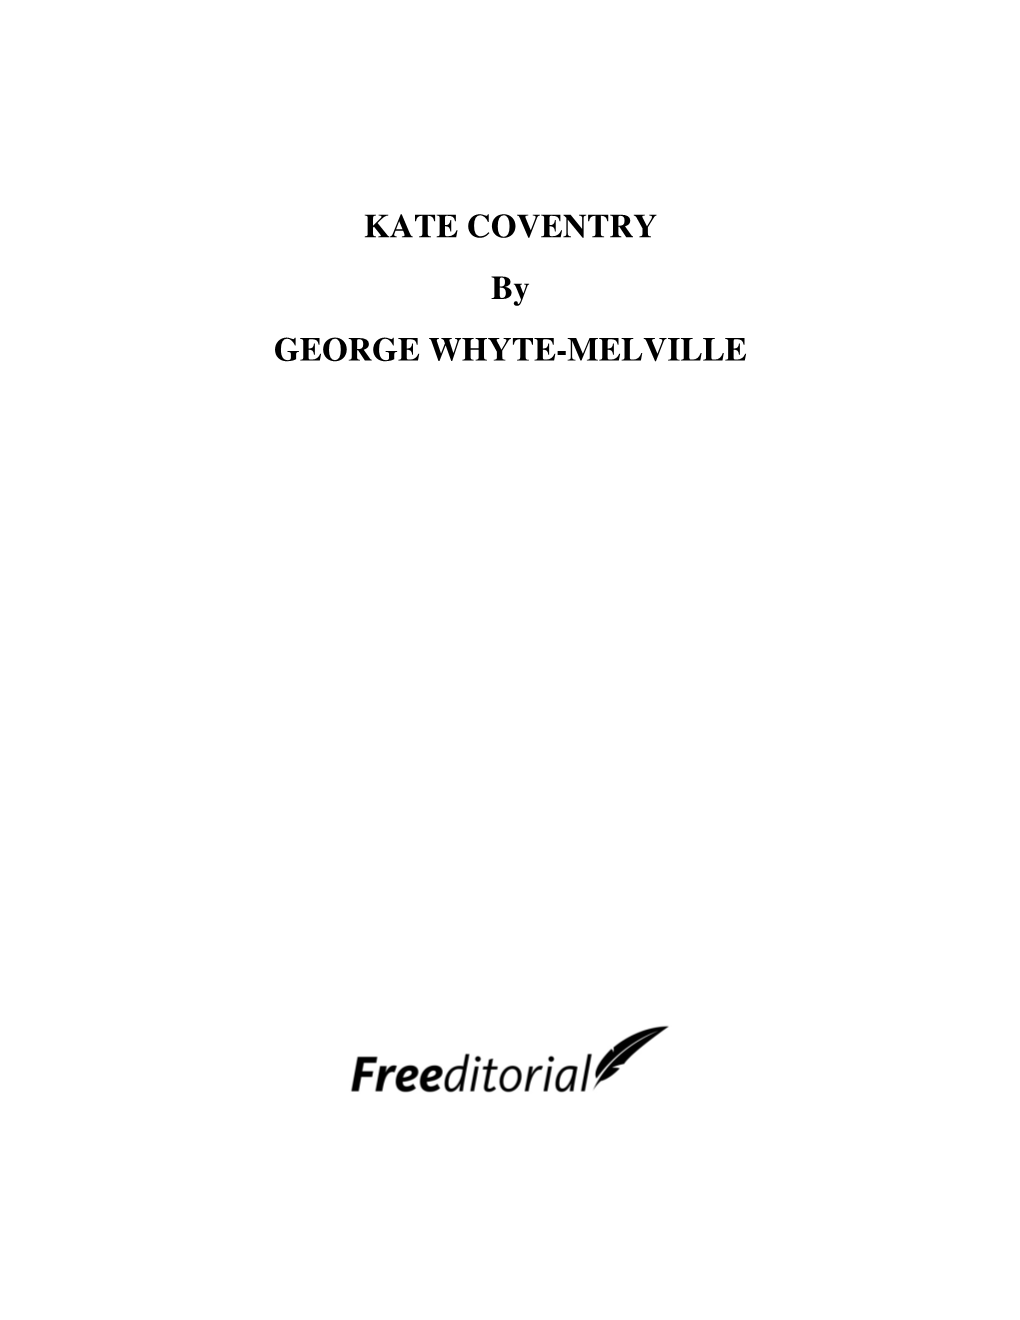 KATE COVENTRY by GEORGE WHYTE-MELVILLE